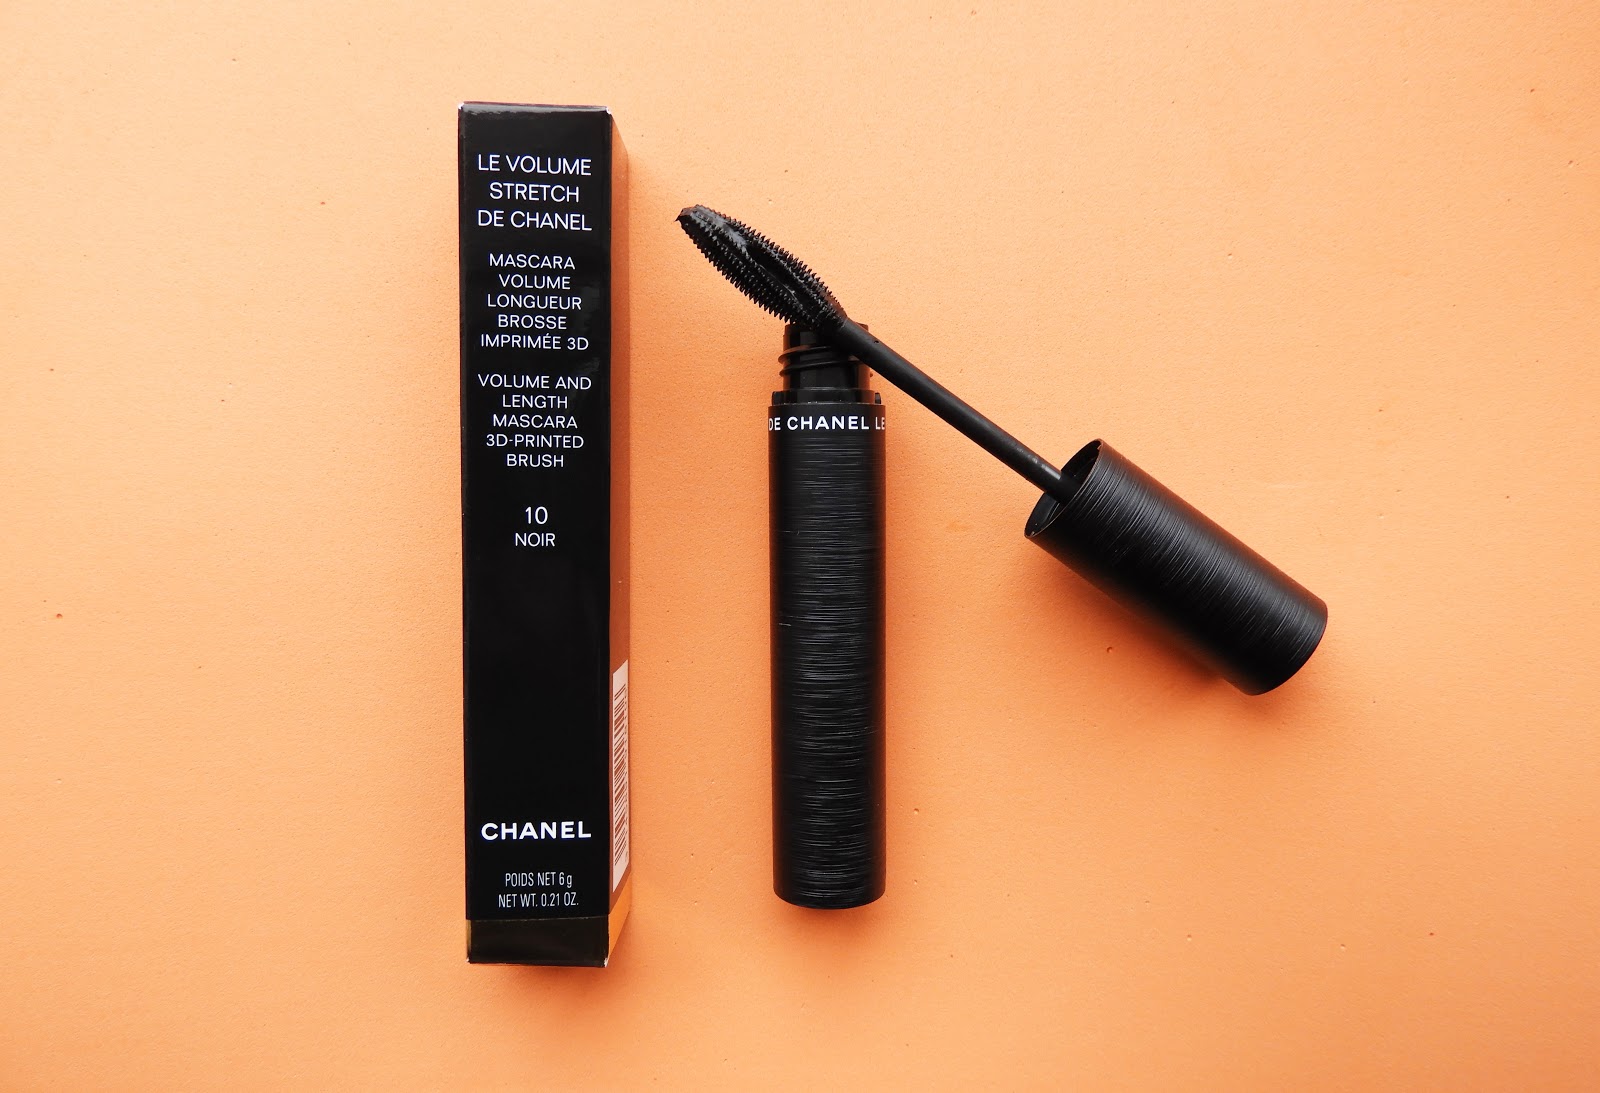 Chanel Le Volume Stretch mascara review 